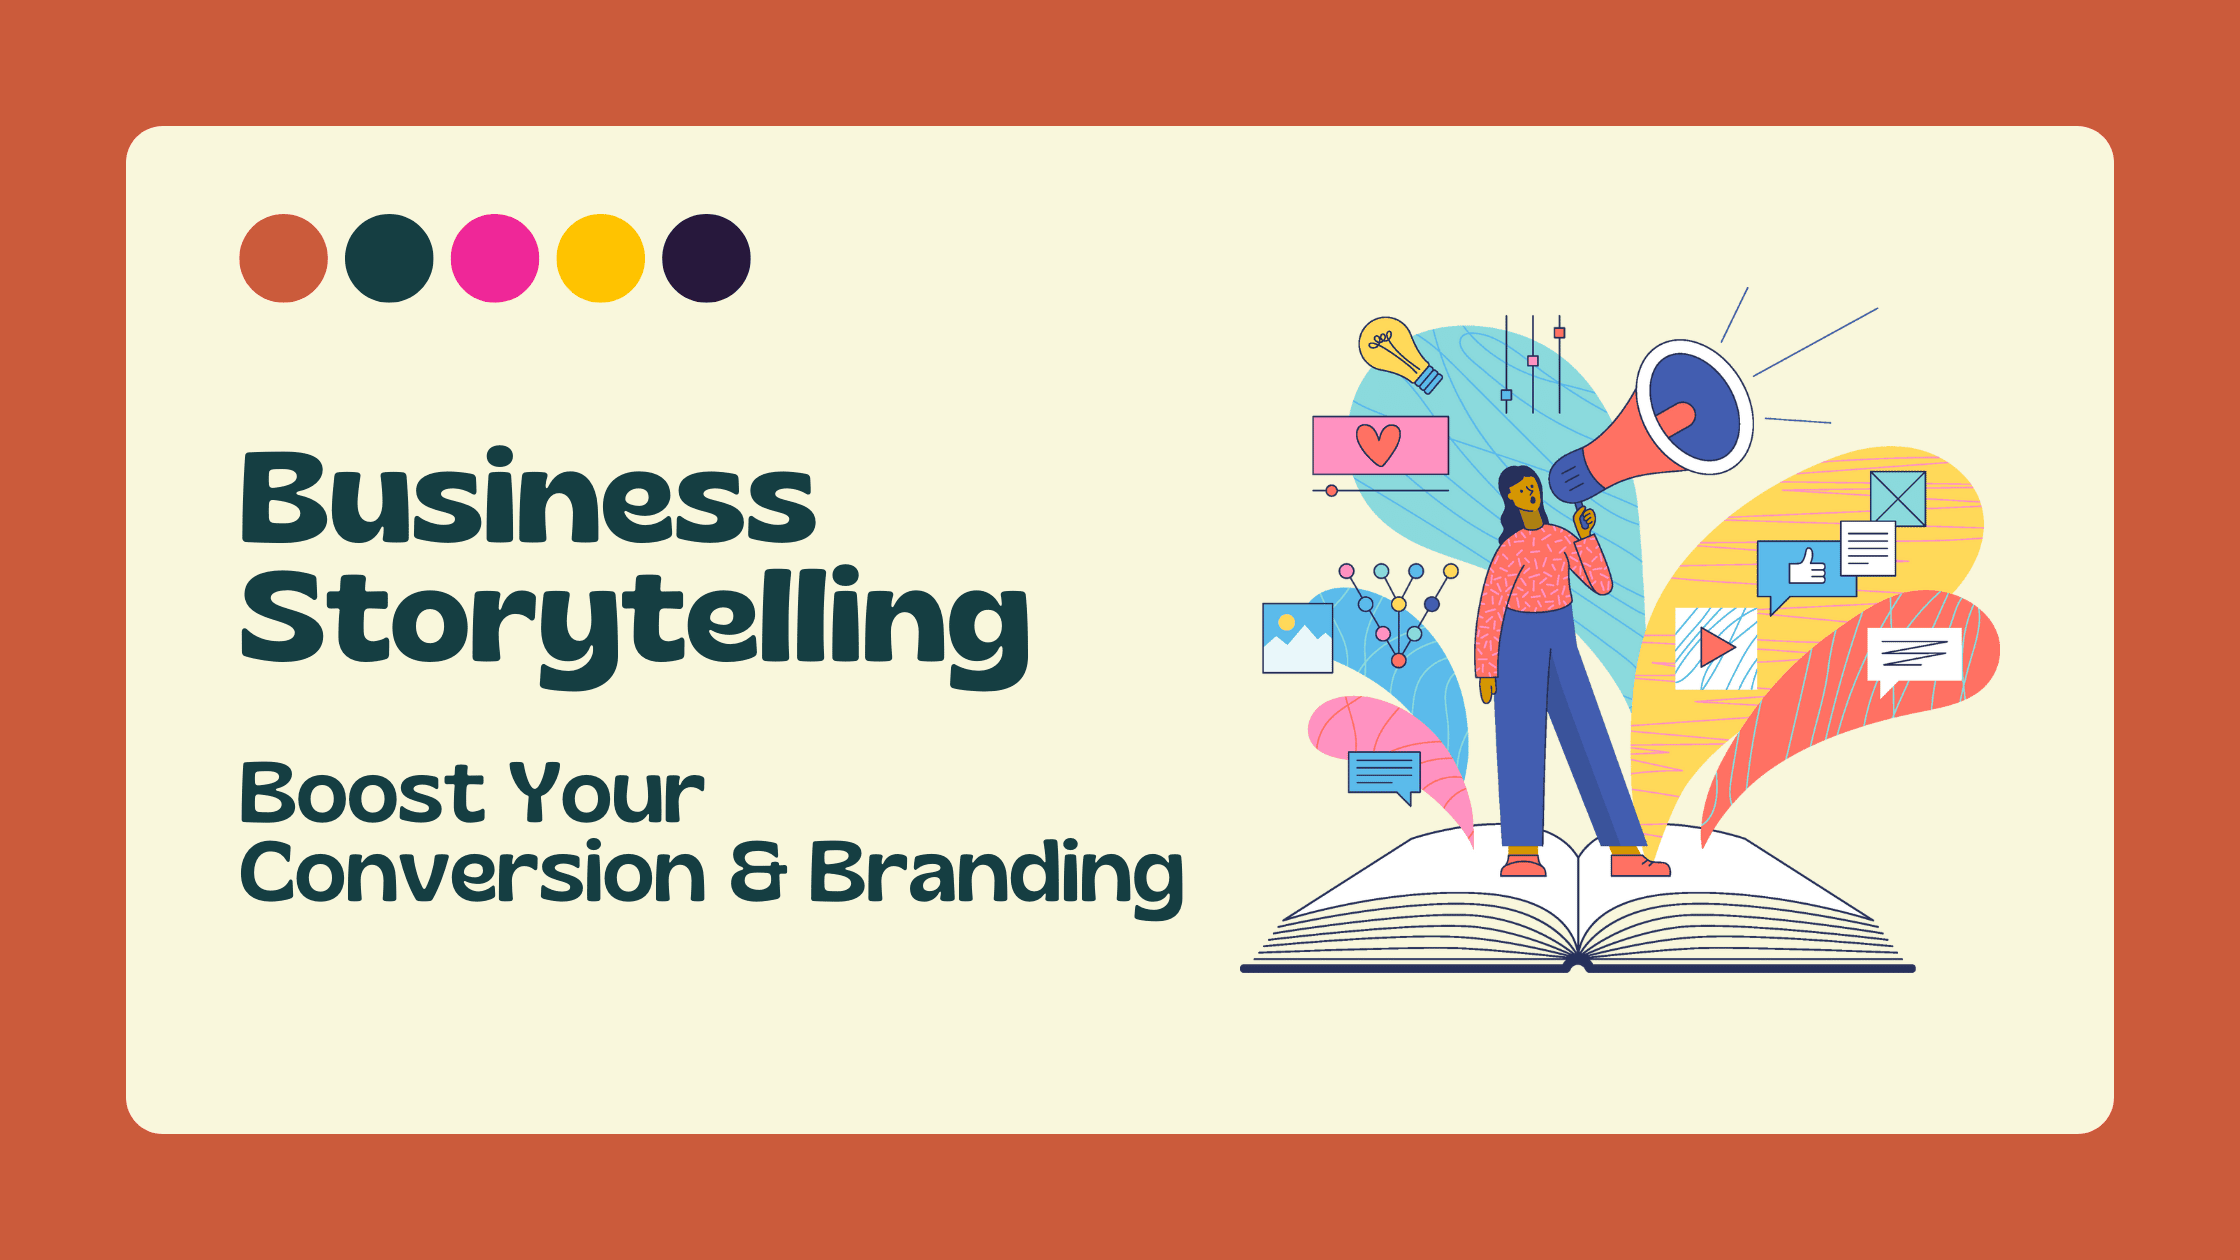 Use Business Storytelling to Boost Your Conversion & Branding